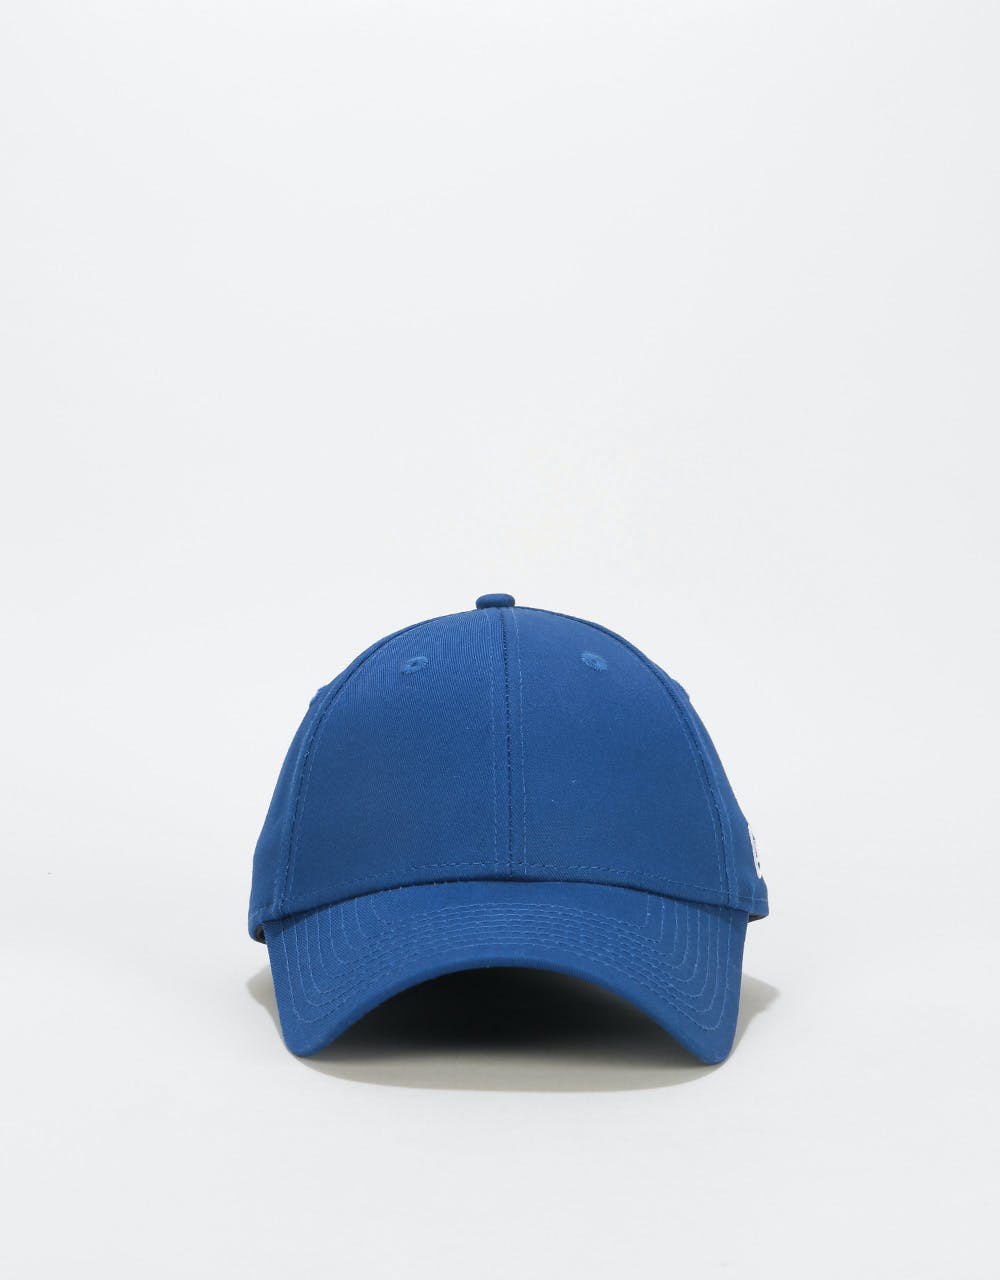 New Era 9Forty Flag Collection Cap - Light Royal/White